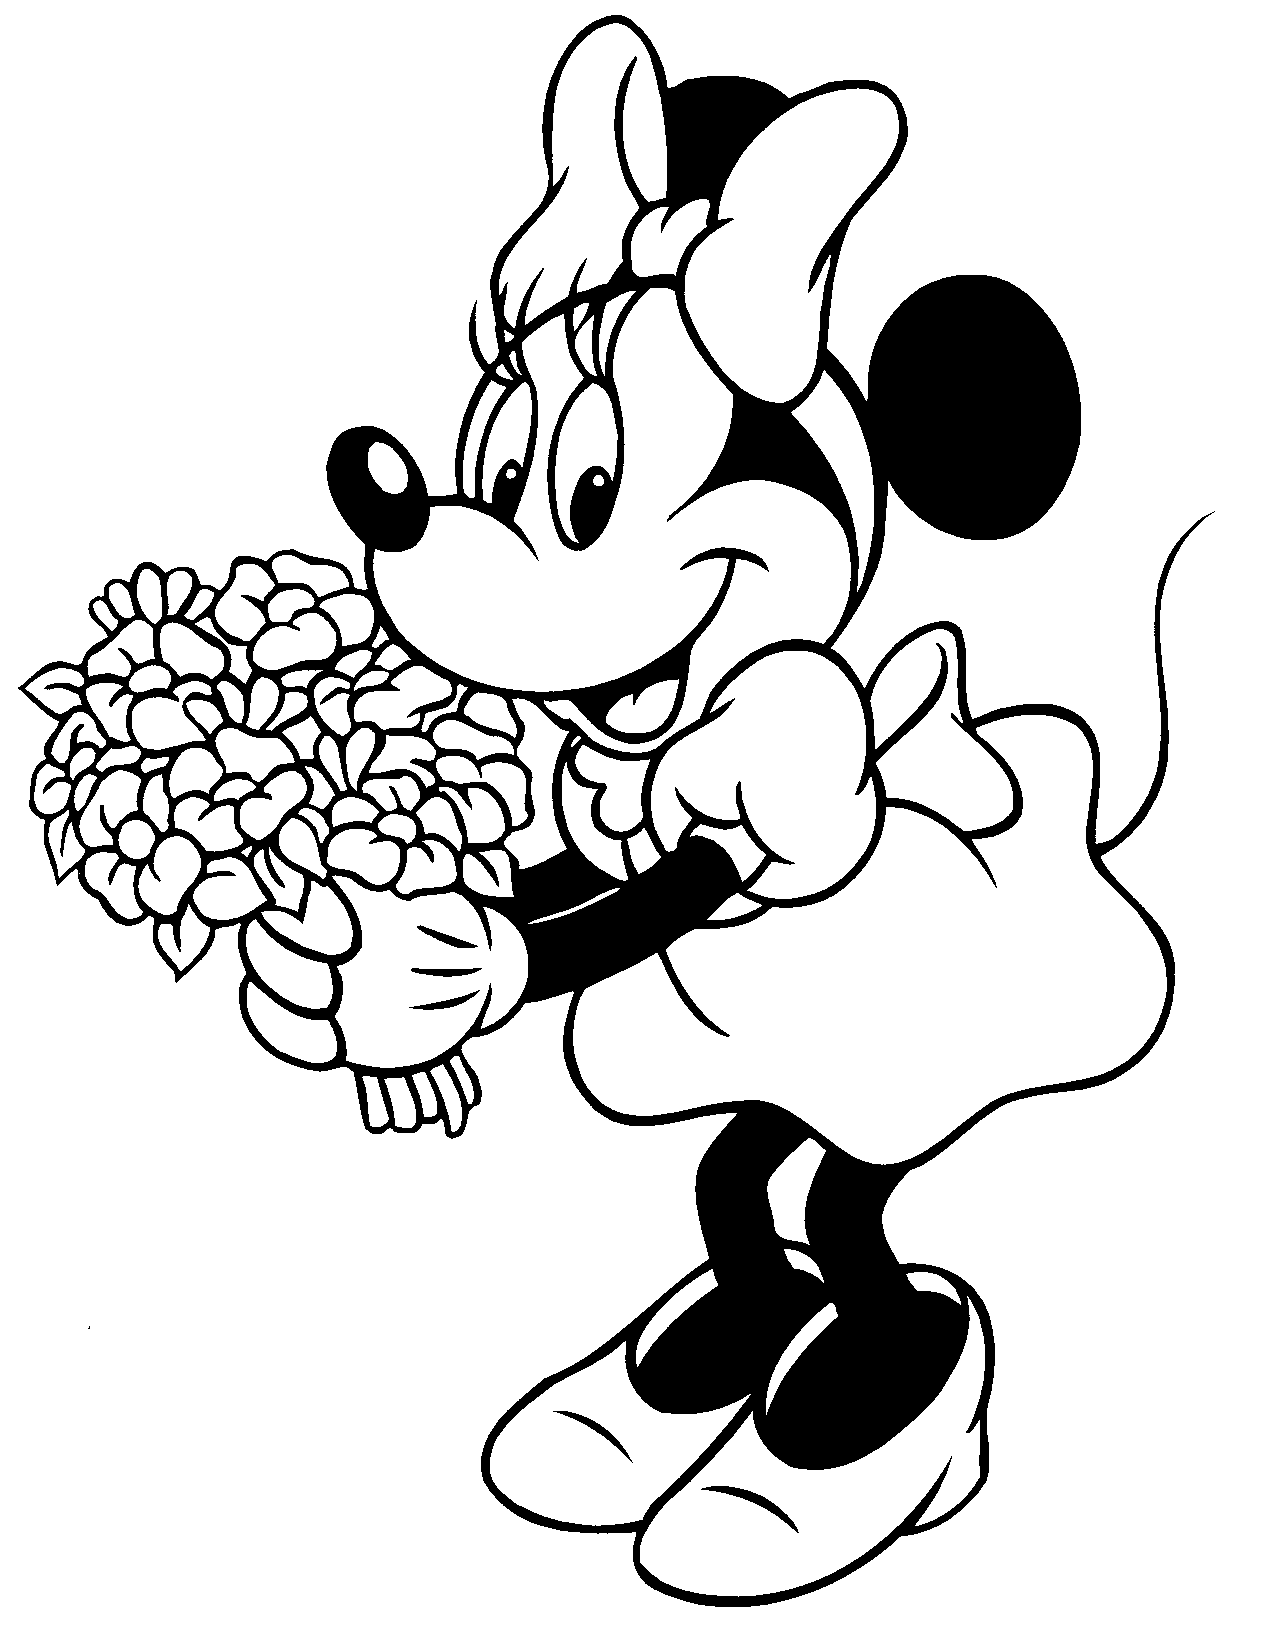 Minnie mouse black and white clipart